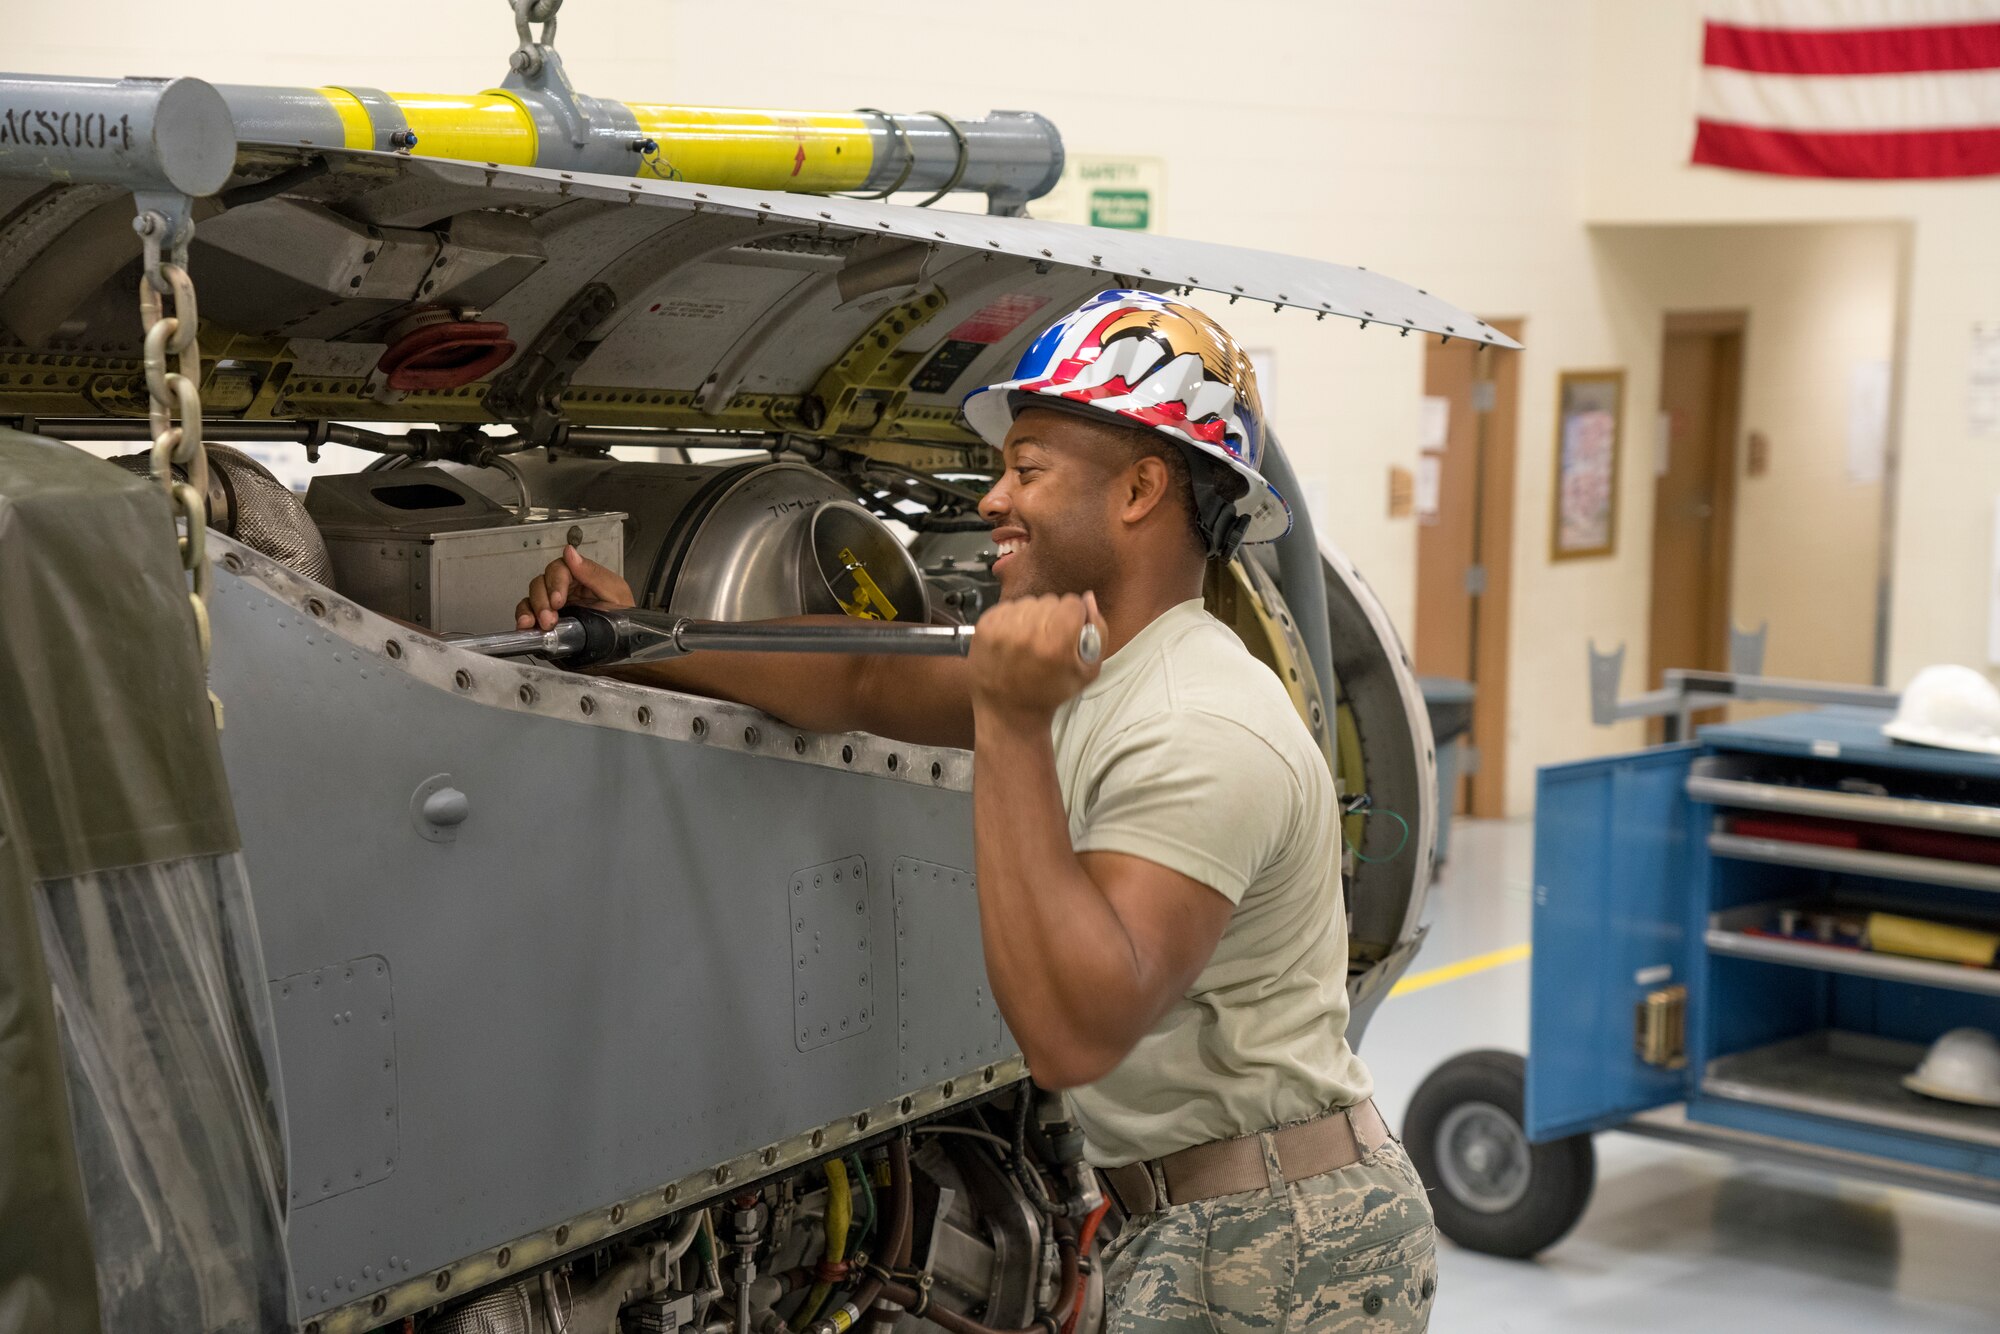 Staff Sgt. Robert Ricks, 403rd Aircraft Maintenance Squadron aerospace propulsion craftsman, secures a bolt on the engine bag in preparation for transportation July 14, 2019 at Keesler Air Force Base, Mississippi. The engine is placed in a shipment bag prior to transportation so it is protected from the elements. (U.S. Air Force photo by Tech. Sgt. Christopher Carranza)